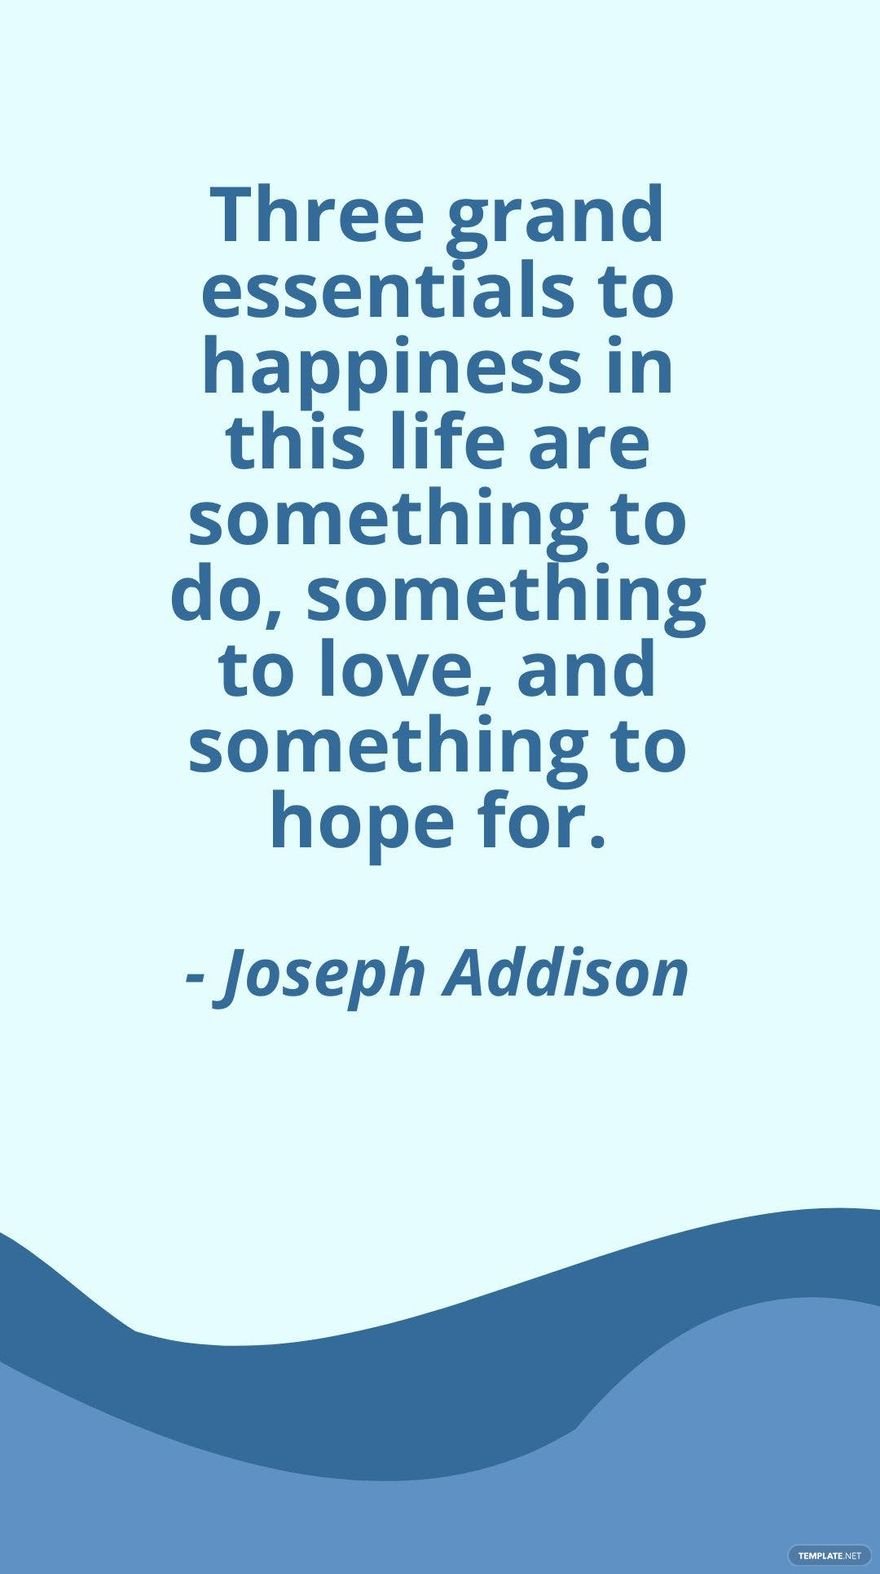 Free Joseph Addison - Three grand essentials to happiness in this life are something to do, something to love, and something to hope for. in JPG